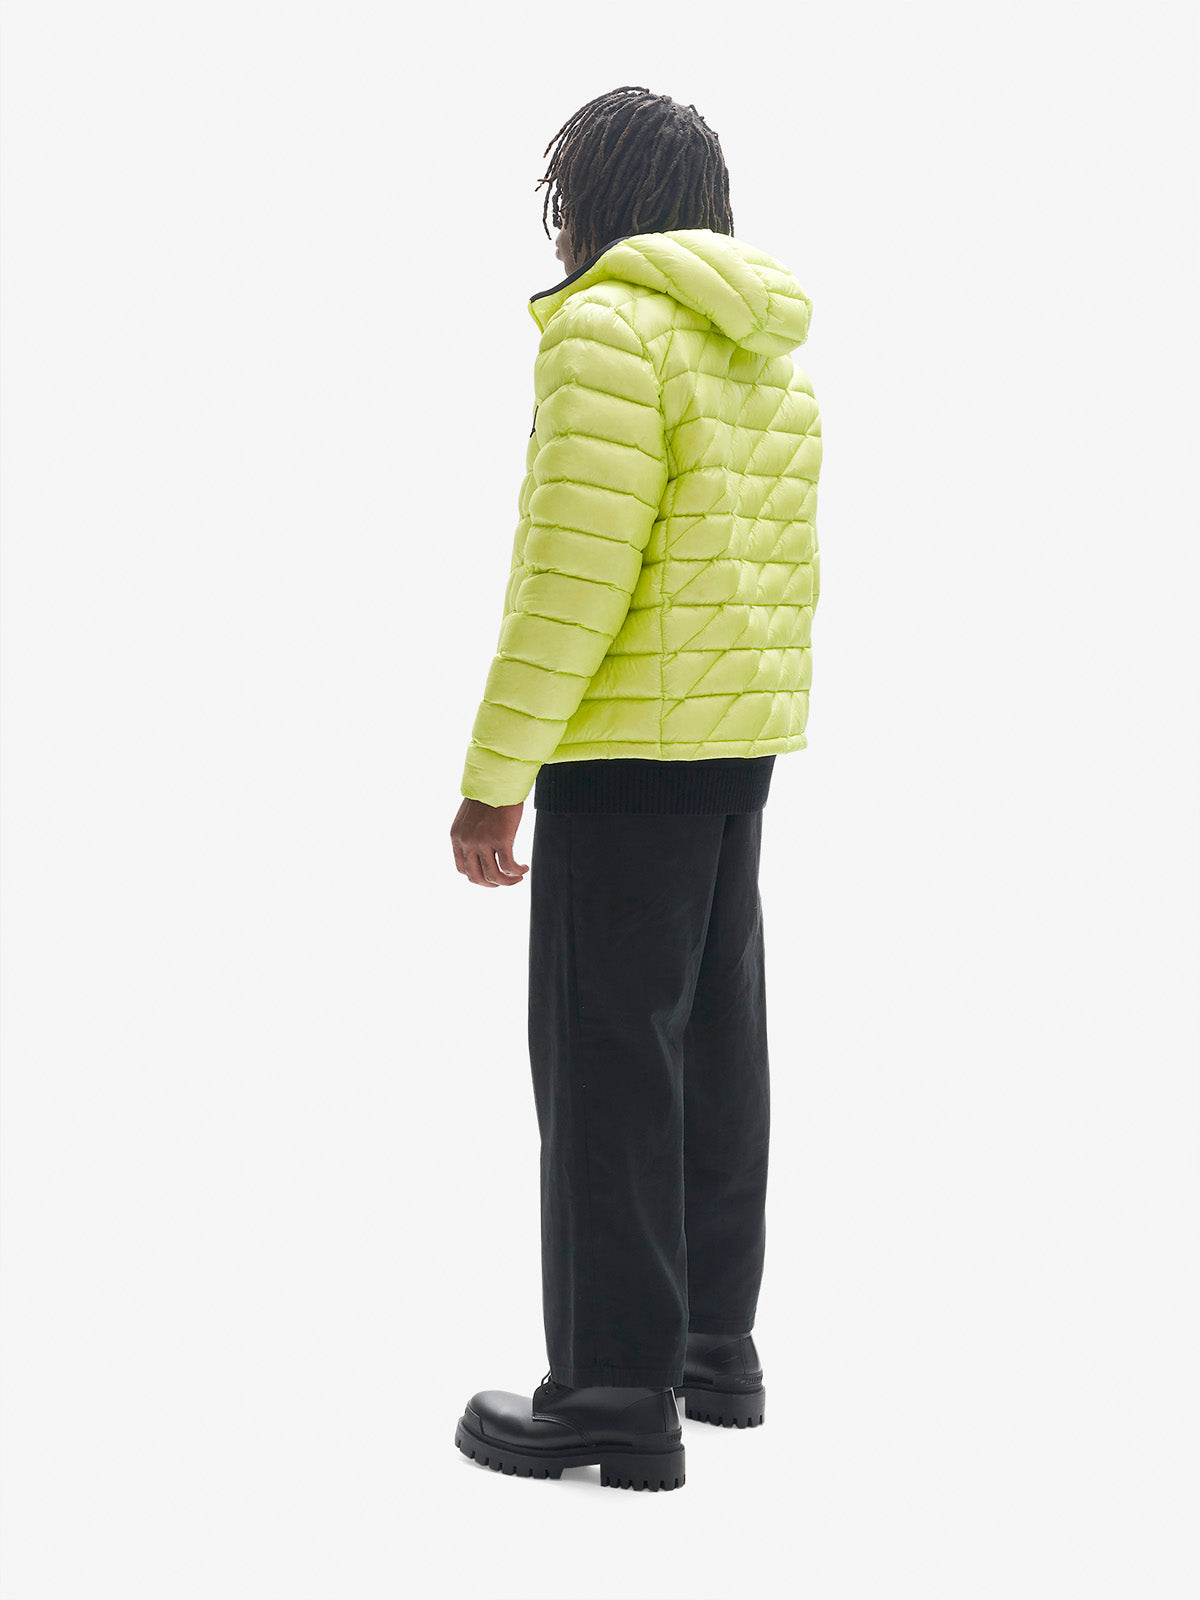 Man PACKABLE DOWN JACKET - Mineral Yellow - back